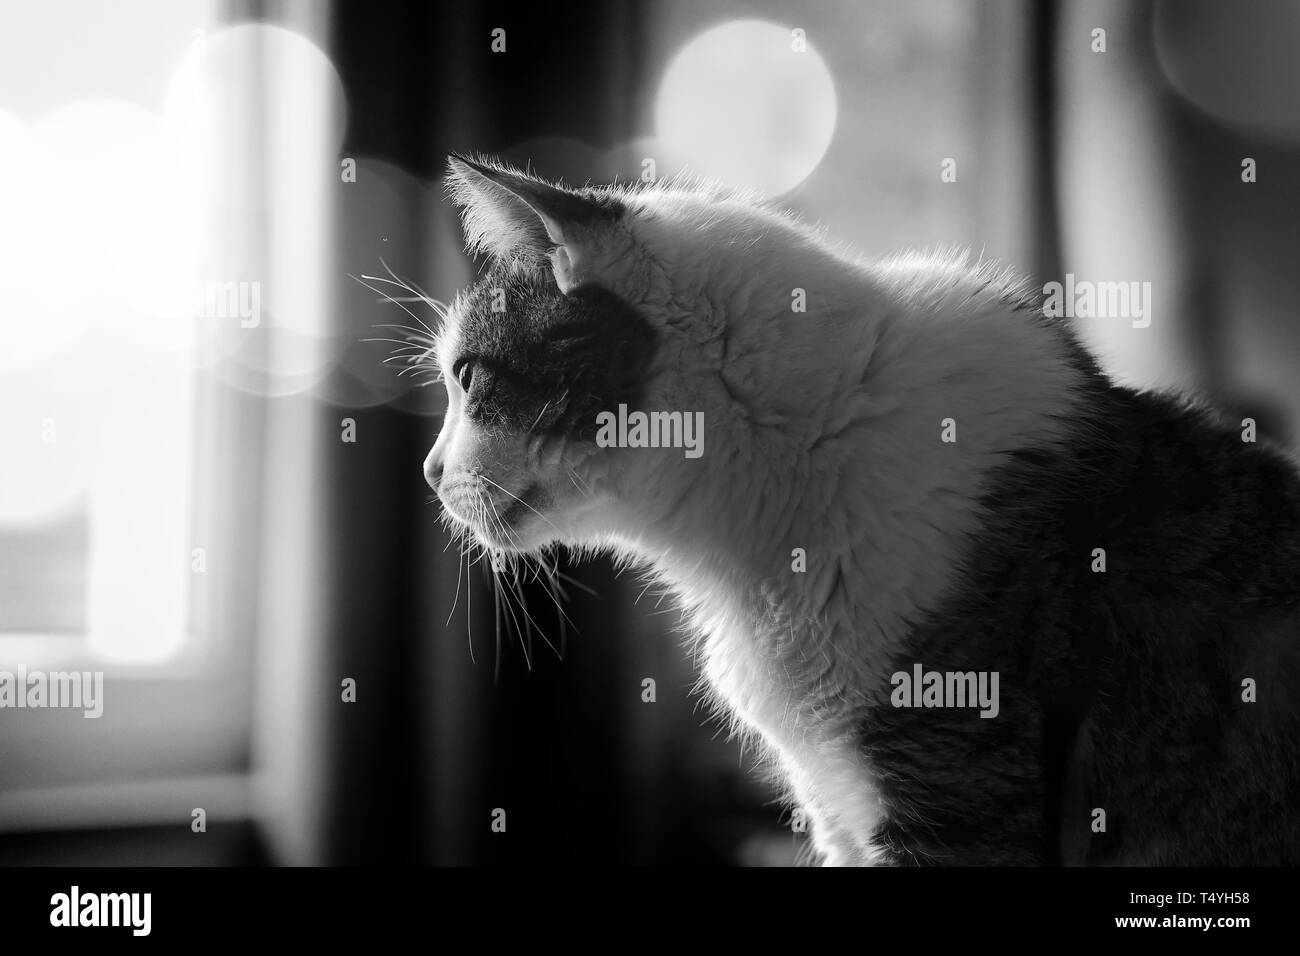 Profile of a tabby cat looking out of a window. Black and white image with bokeh background. Stock Photo